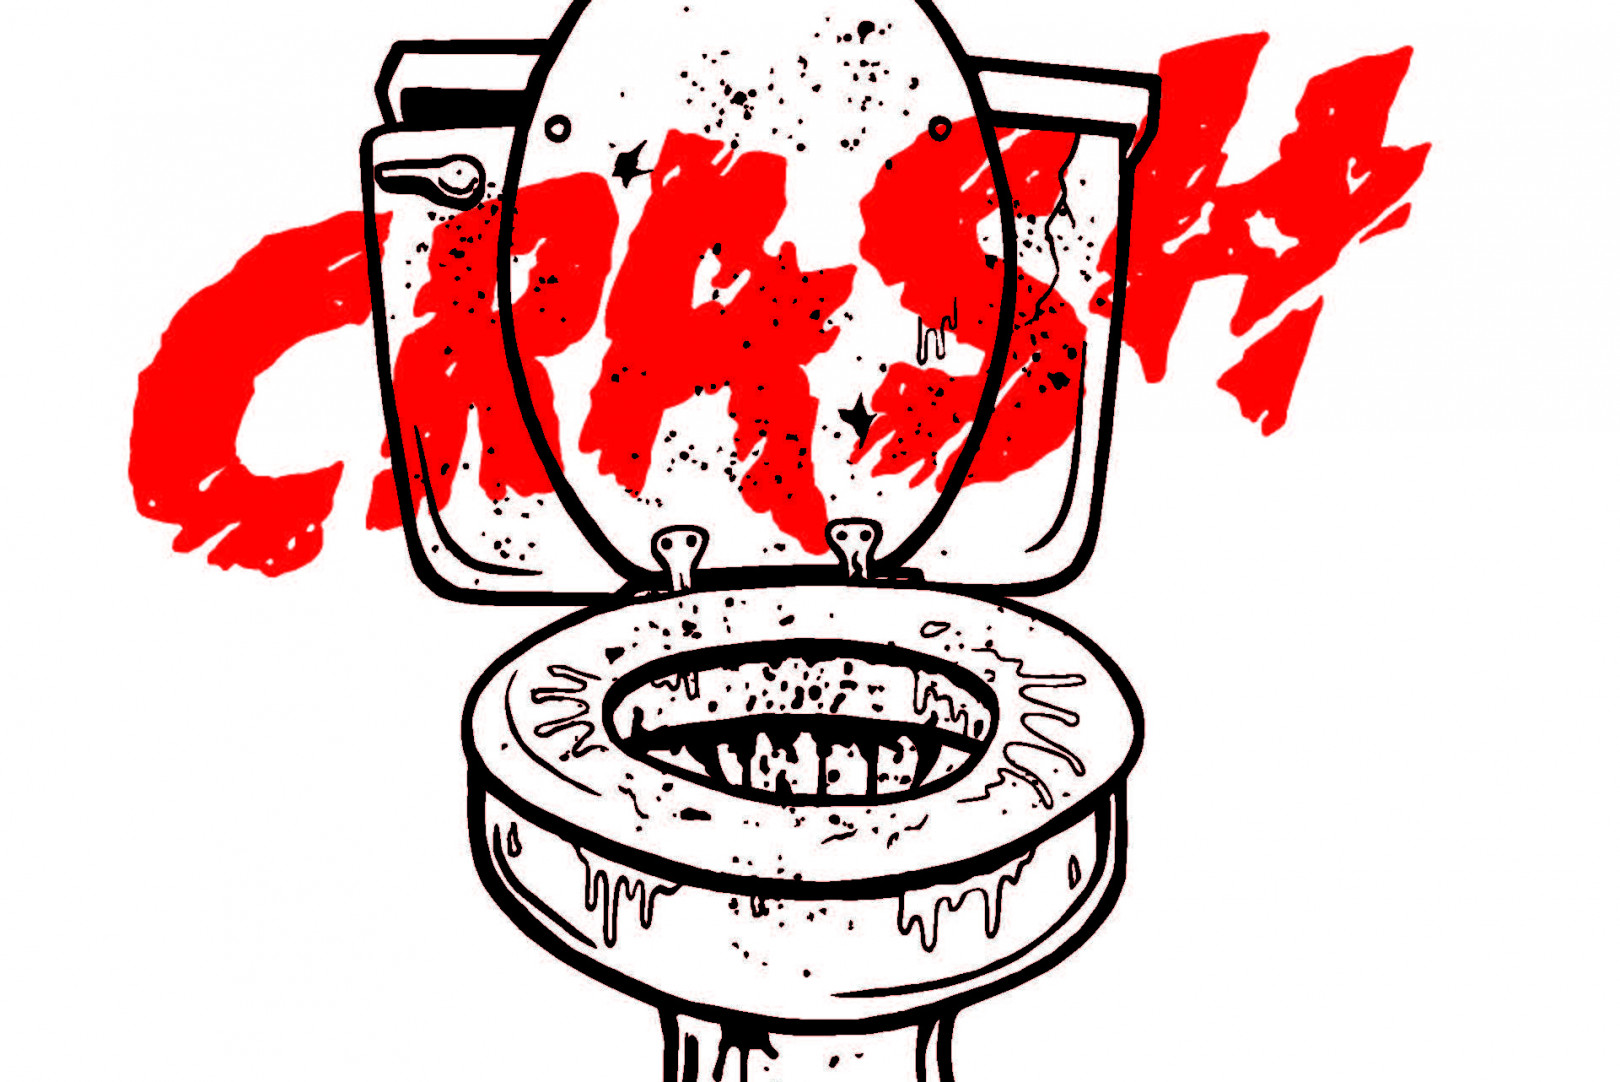 Crash Tour Podcast announce new episodes, theme song and contest